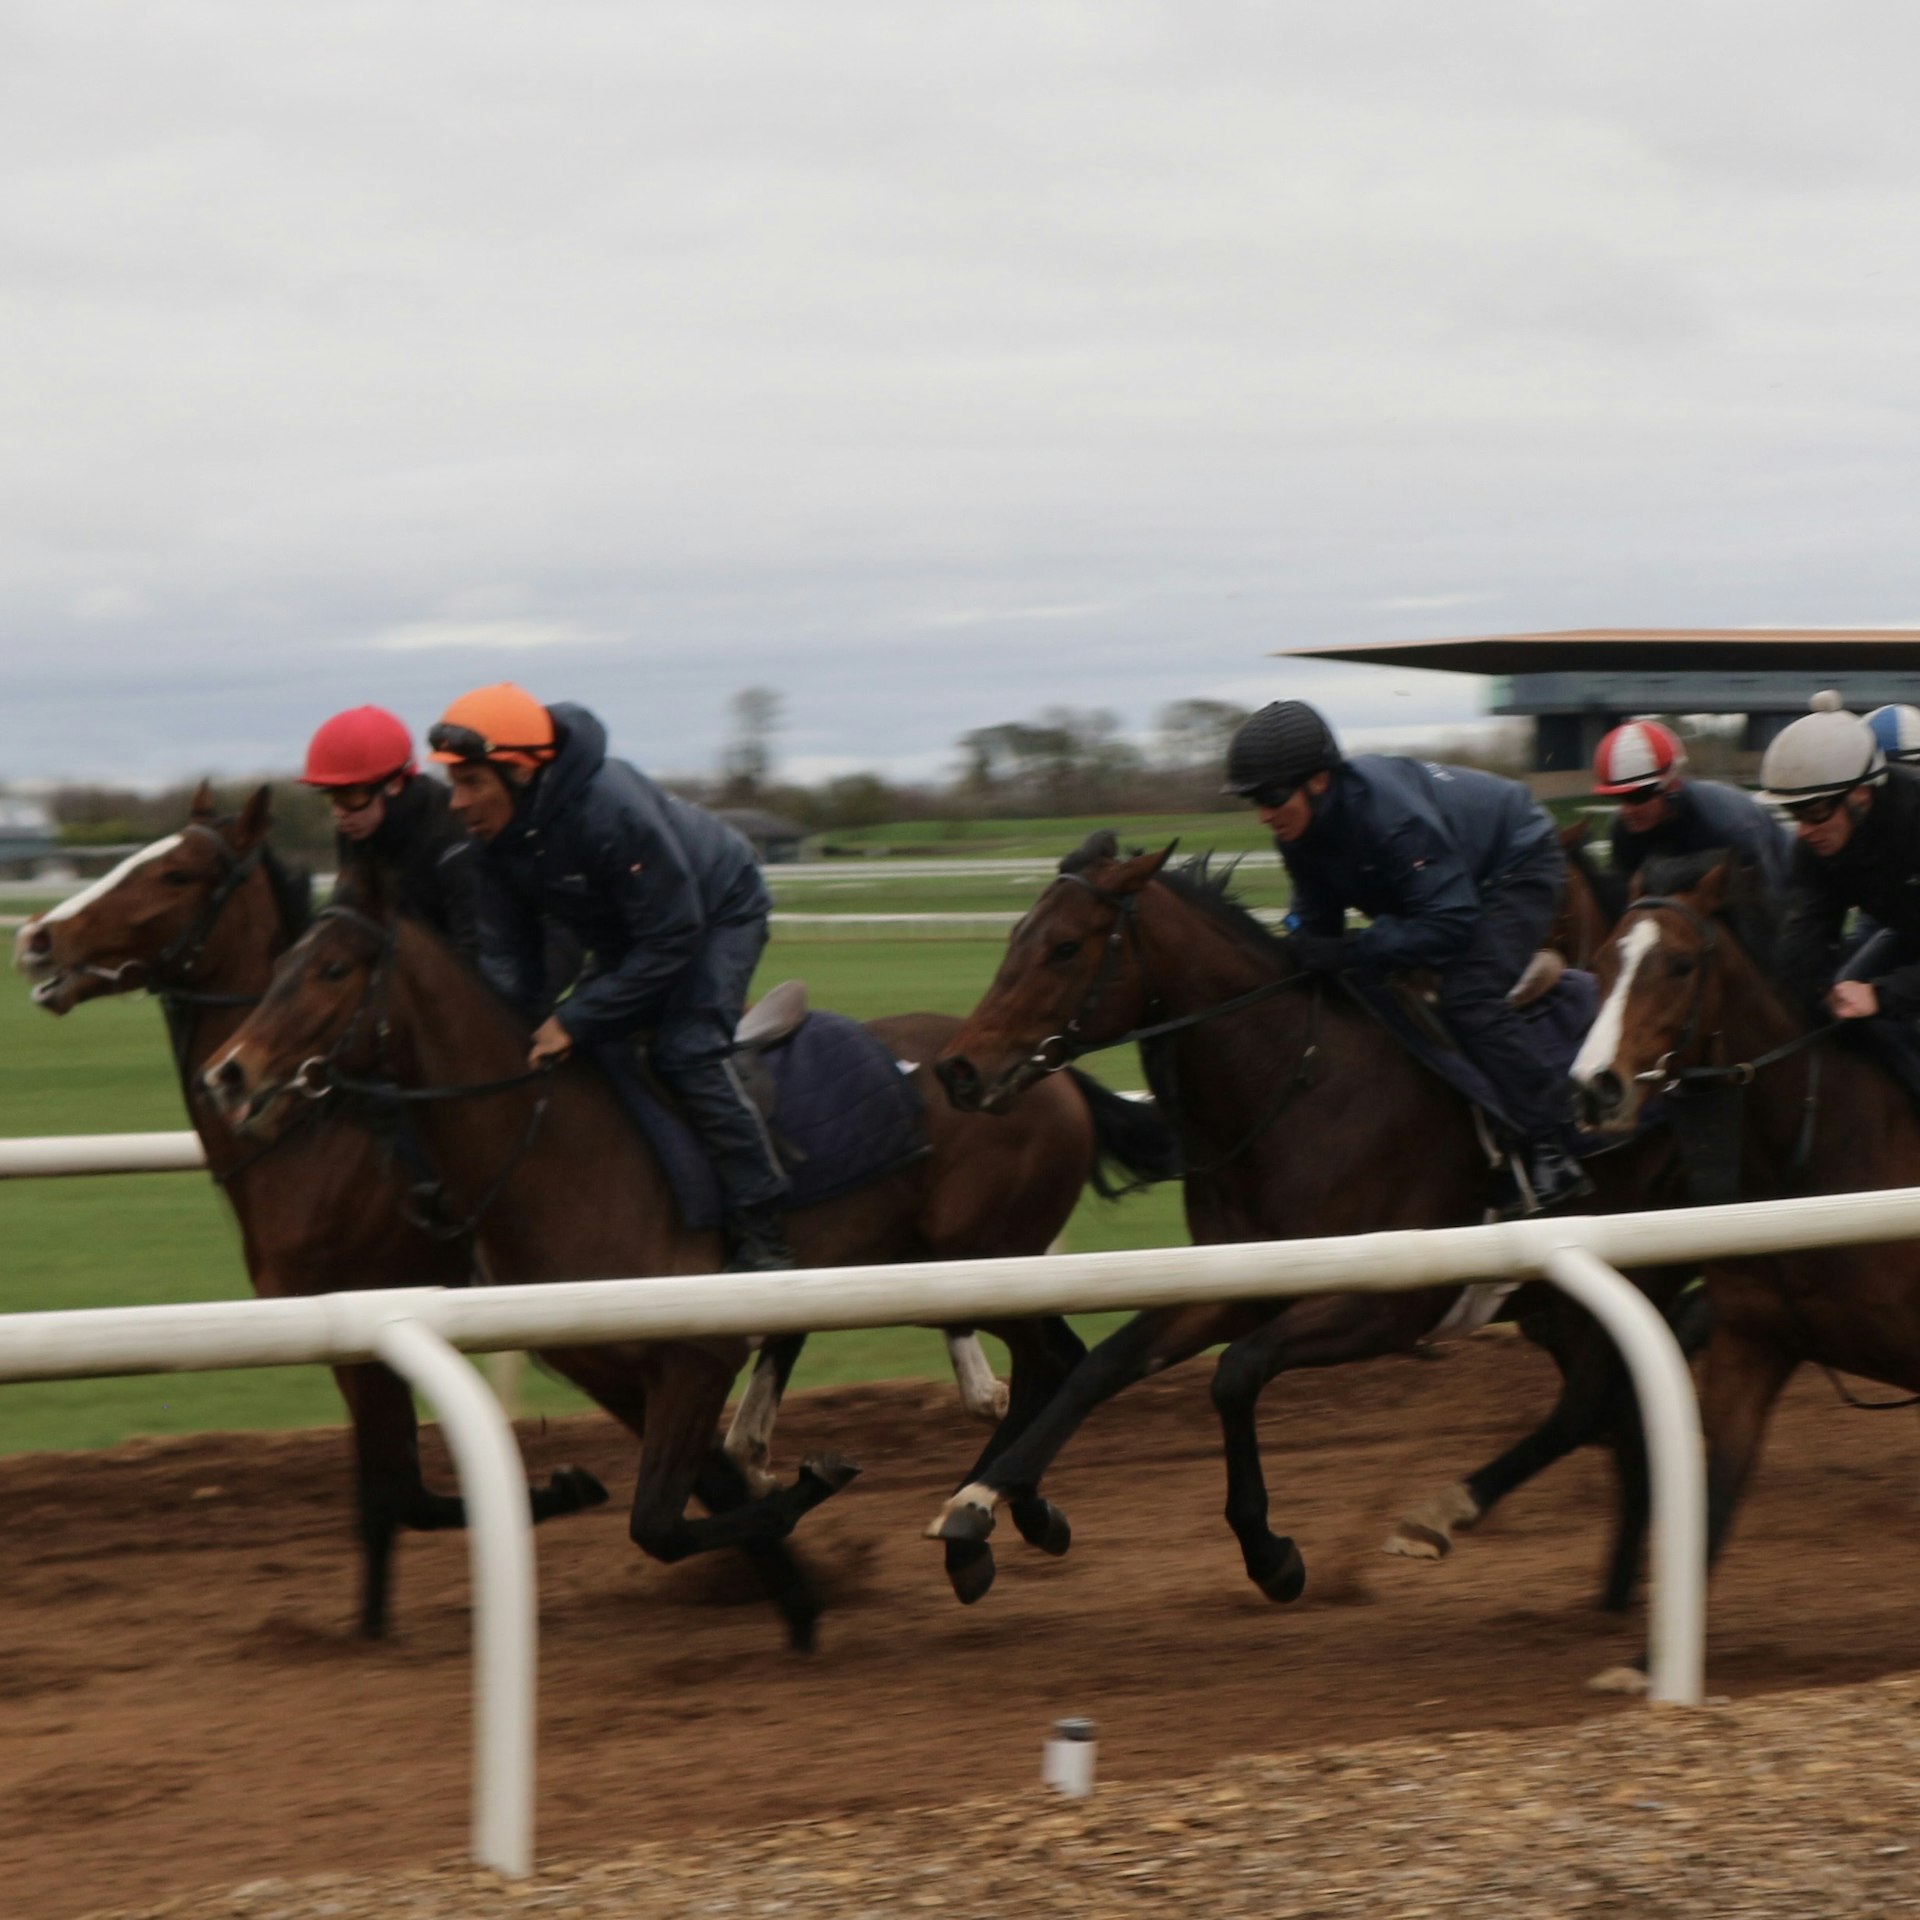 Horses on a race track being ridden by jockey in gloomy wet weather